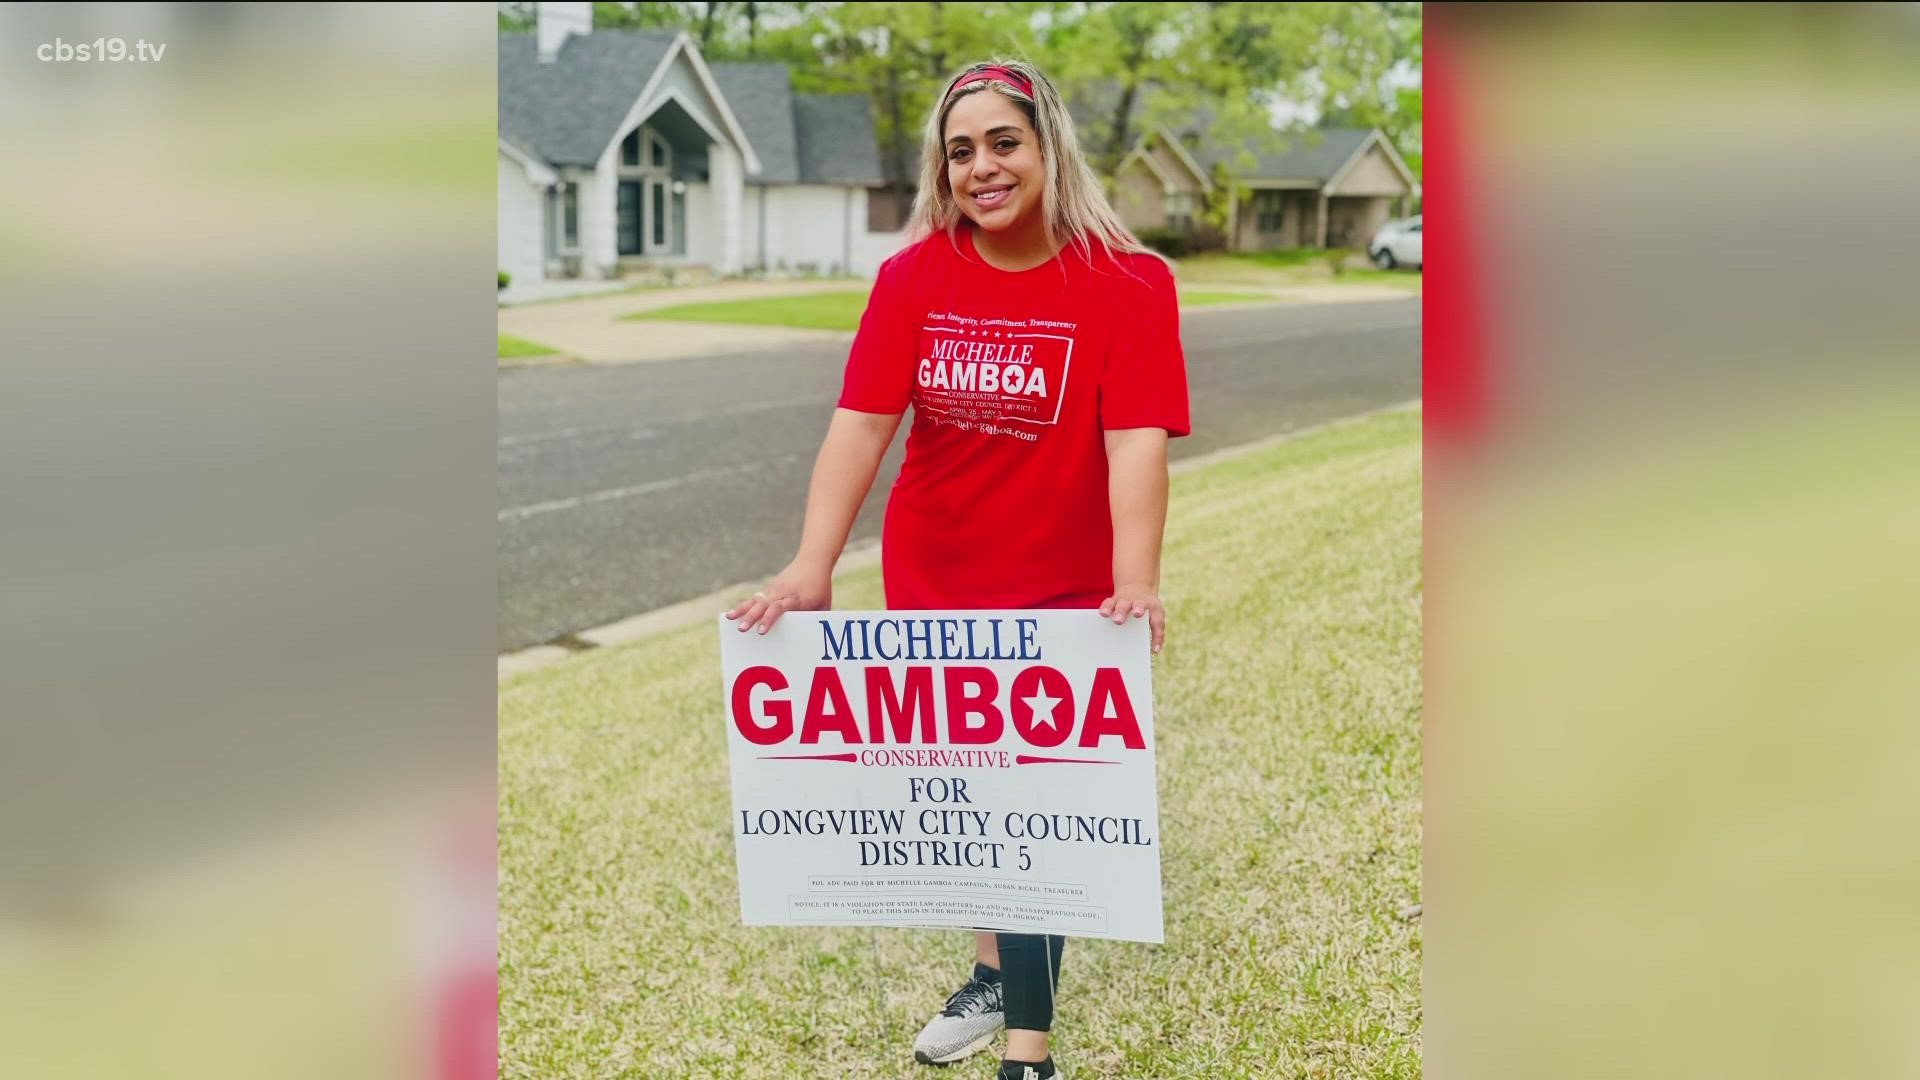 This past election solidified Michelle Gamboa's seat as the new Longview District 5 Council Member. Making her the first Hispanic and youngest member on council.